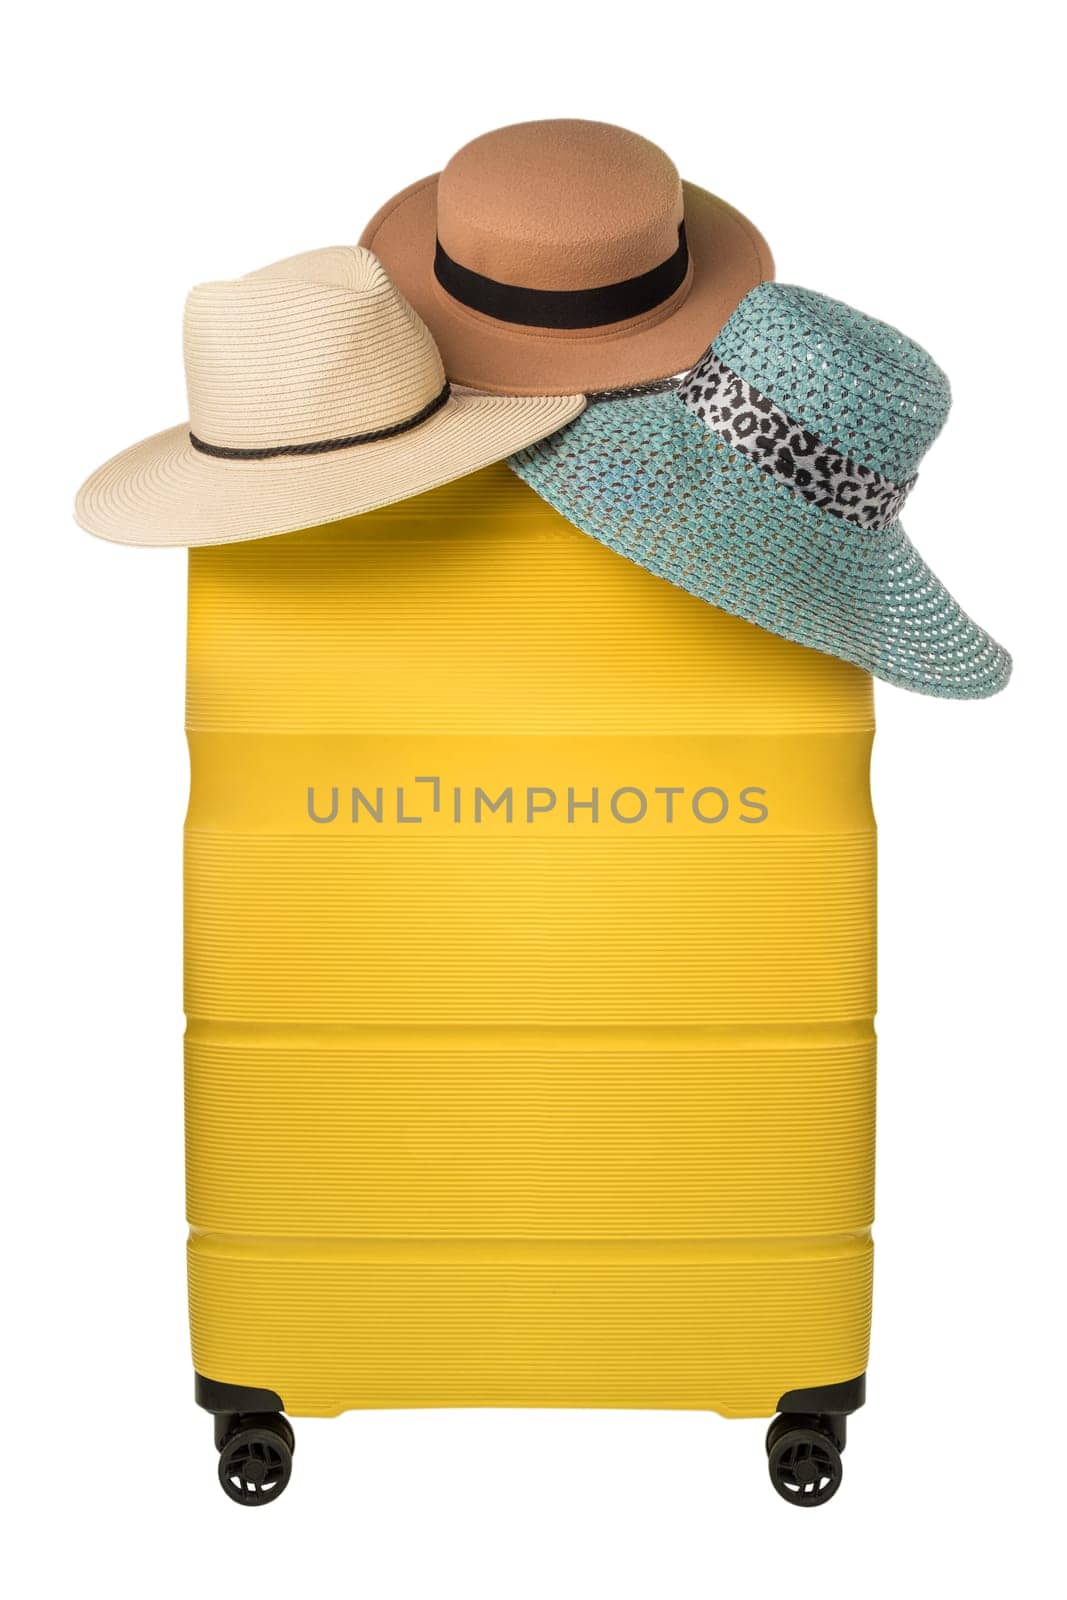 Travel yellow suitcase with hats hanging on top isolated on white background. Travel shopping or travel choice concept by dmitryz